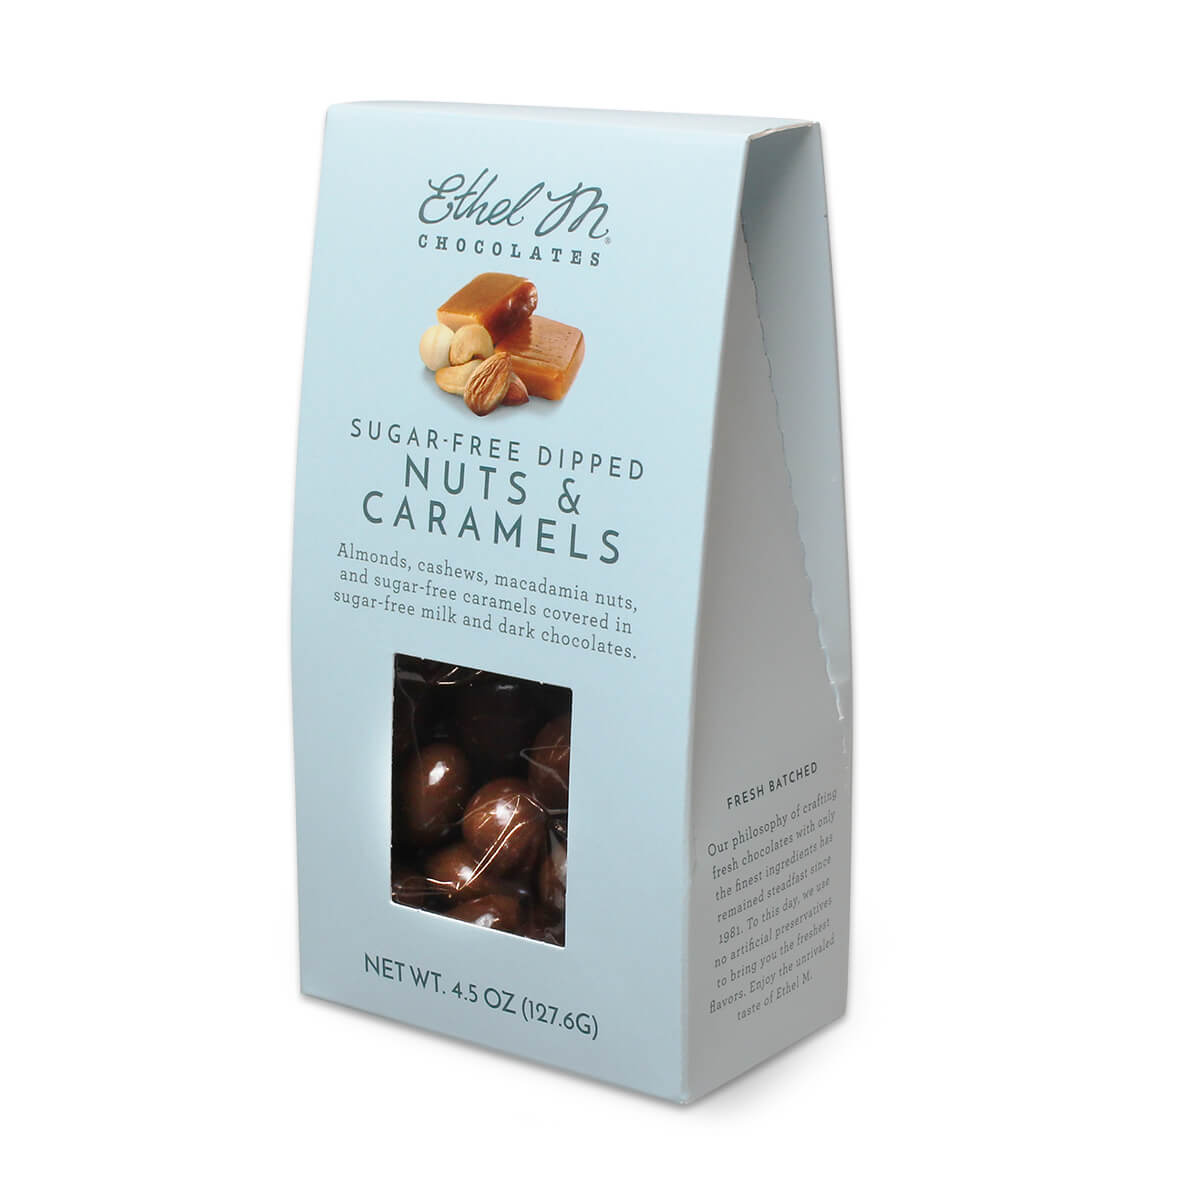 Sugar Free Dipped Nuts and Caramels 4.5oz snack